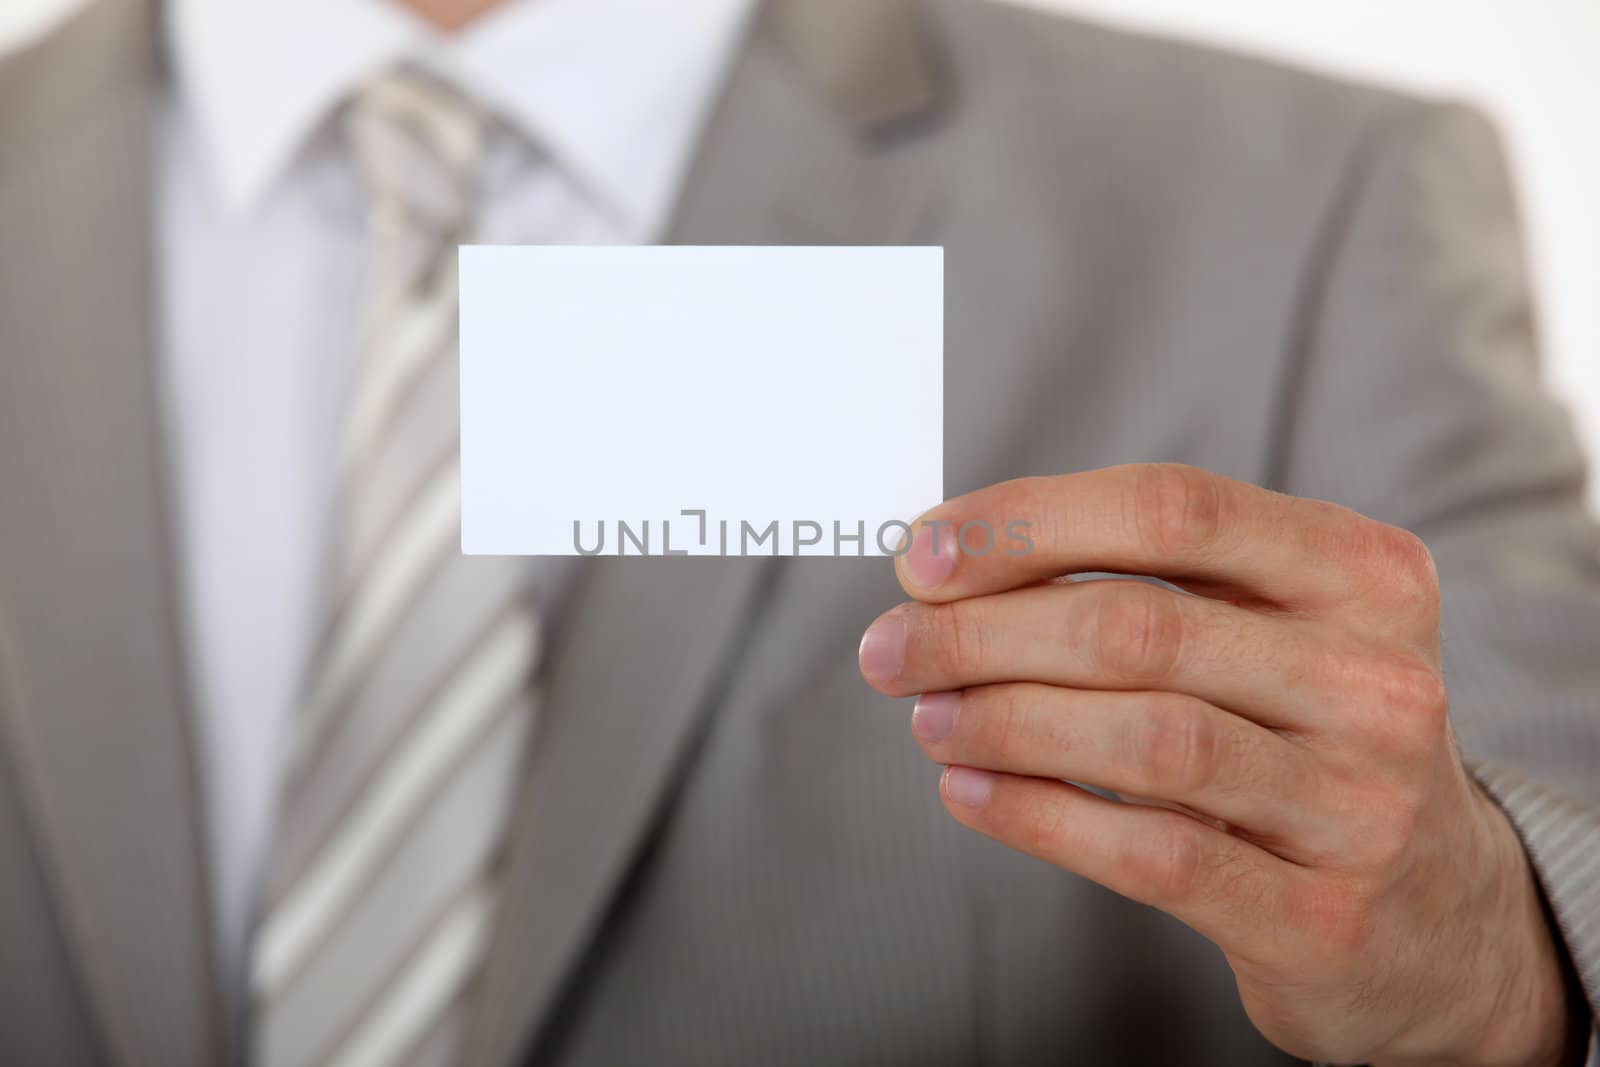 Man holding up a blank business card